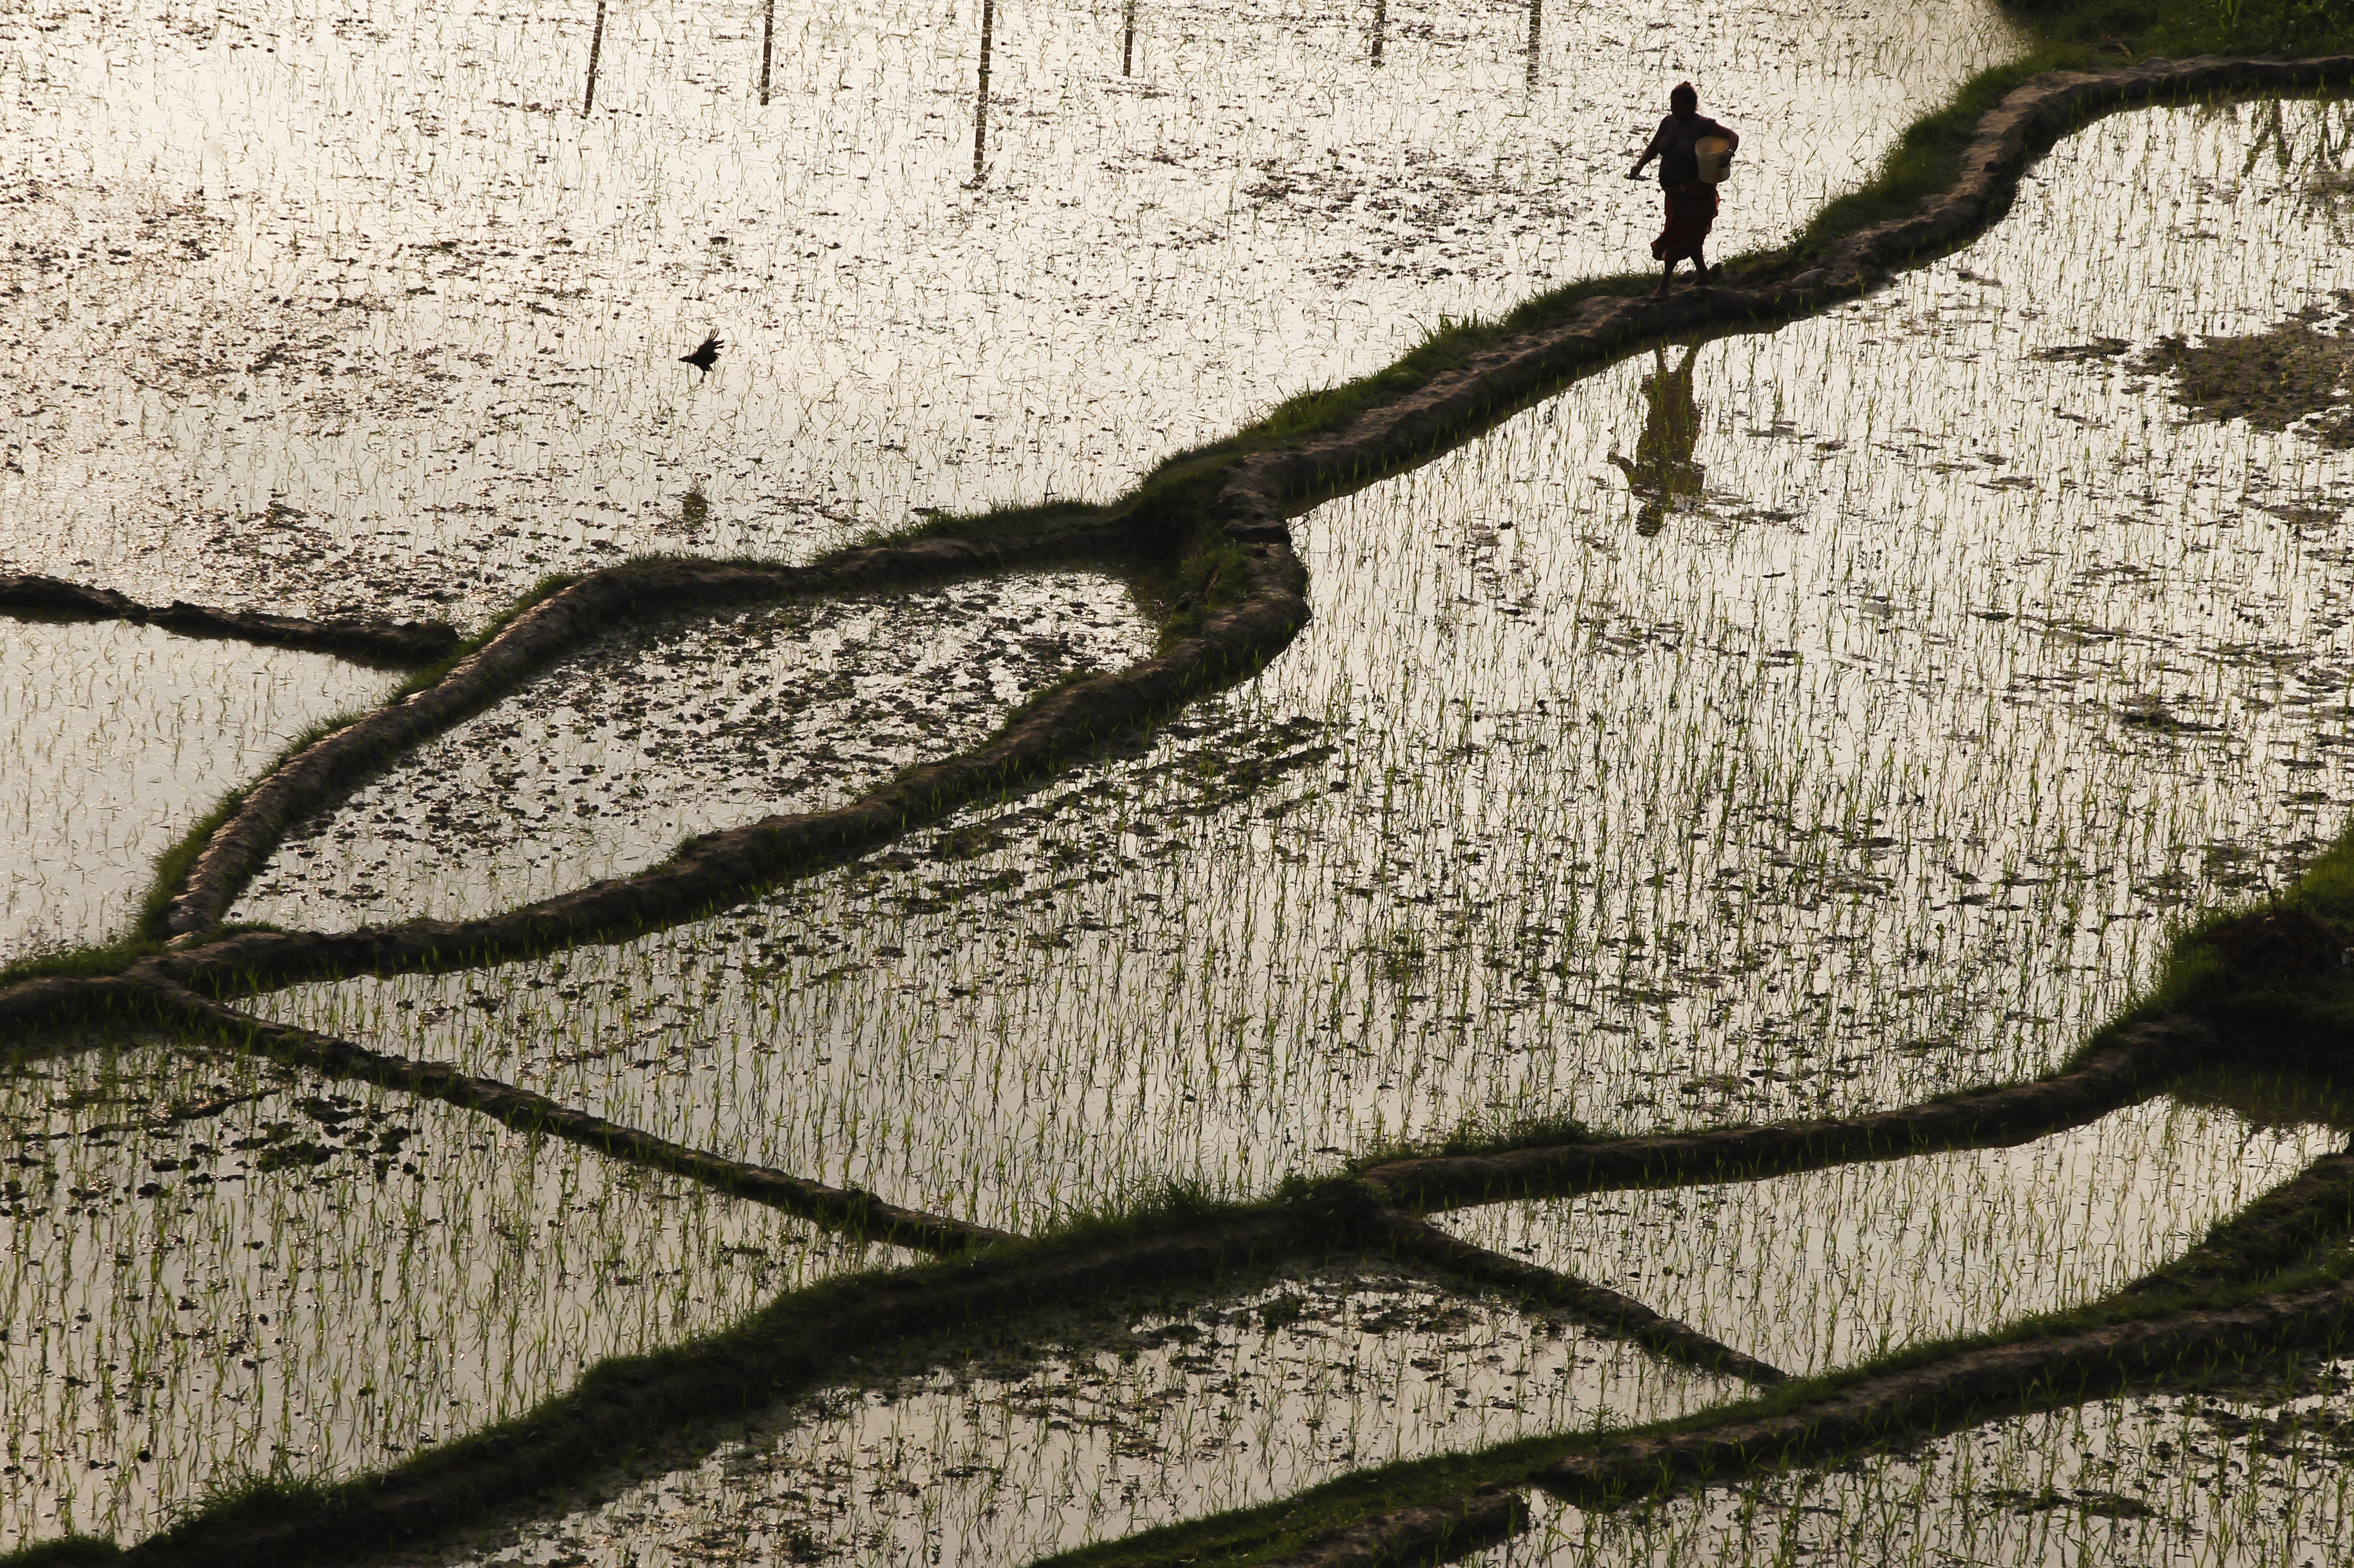 A Nepalese farmer walks through a paddy field in Kathmandu, Nepal, Tuesday, June 26, 2018. Agriculture is the main source of income and employment for most people in Nepal, and rice is one of the main crops. (AP Photo/Niranjan Shrestha)